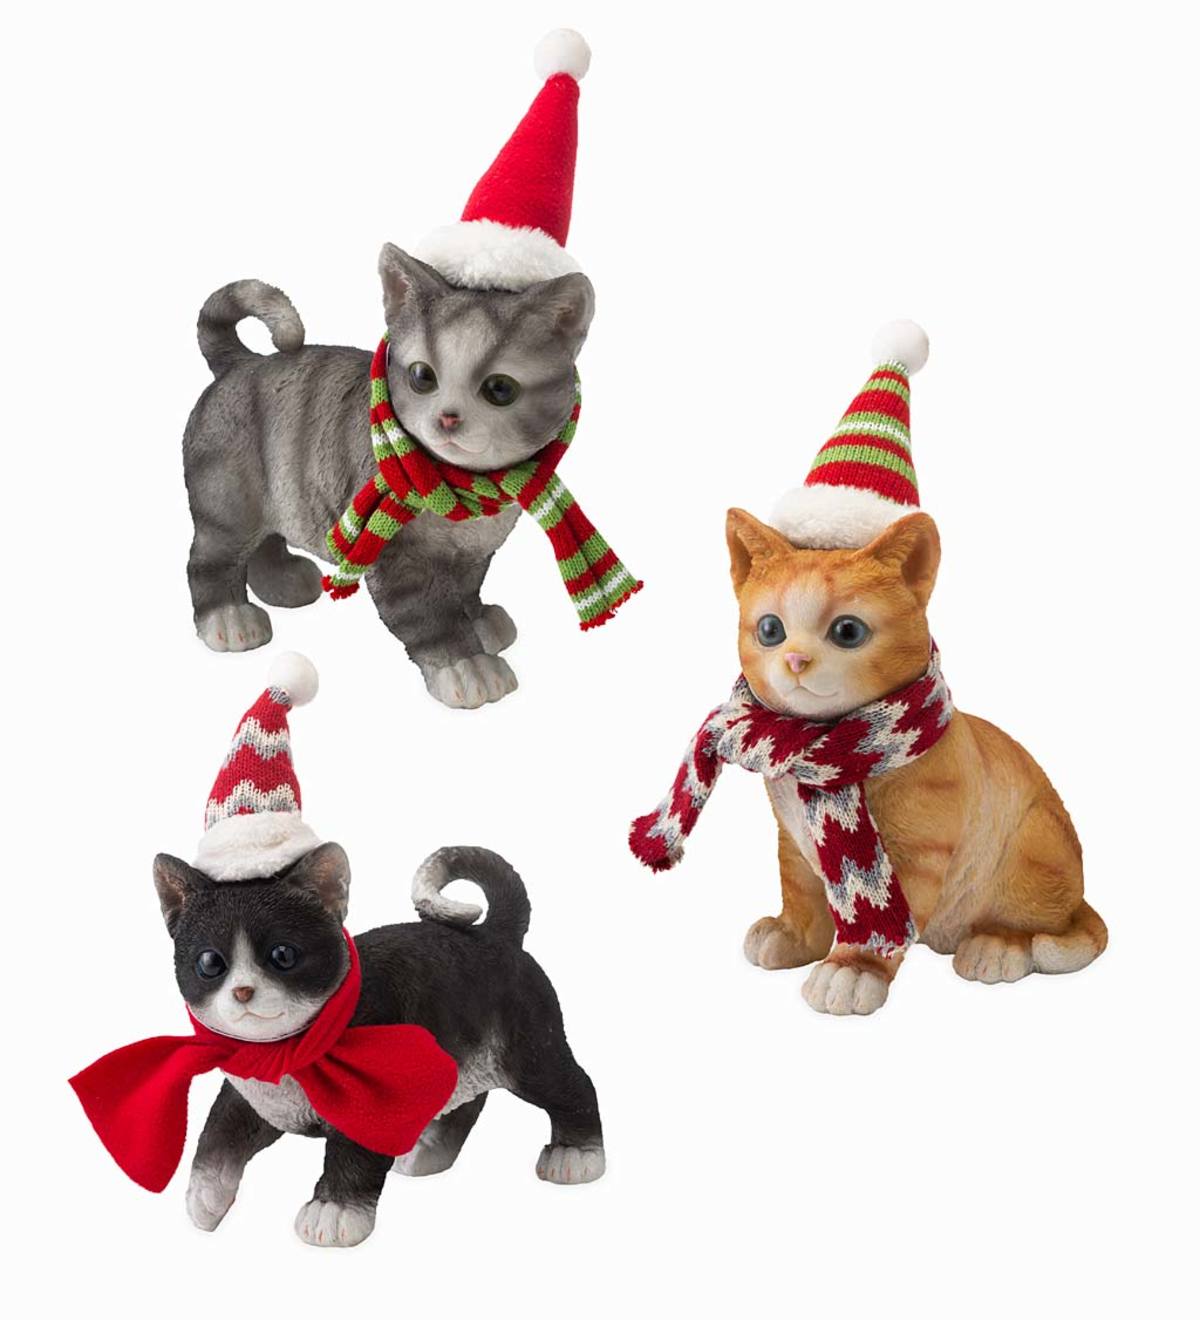 Holiday Kitten Statues with Hats and Scarves, Set of 3